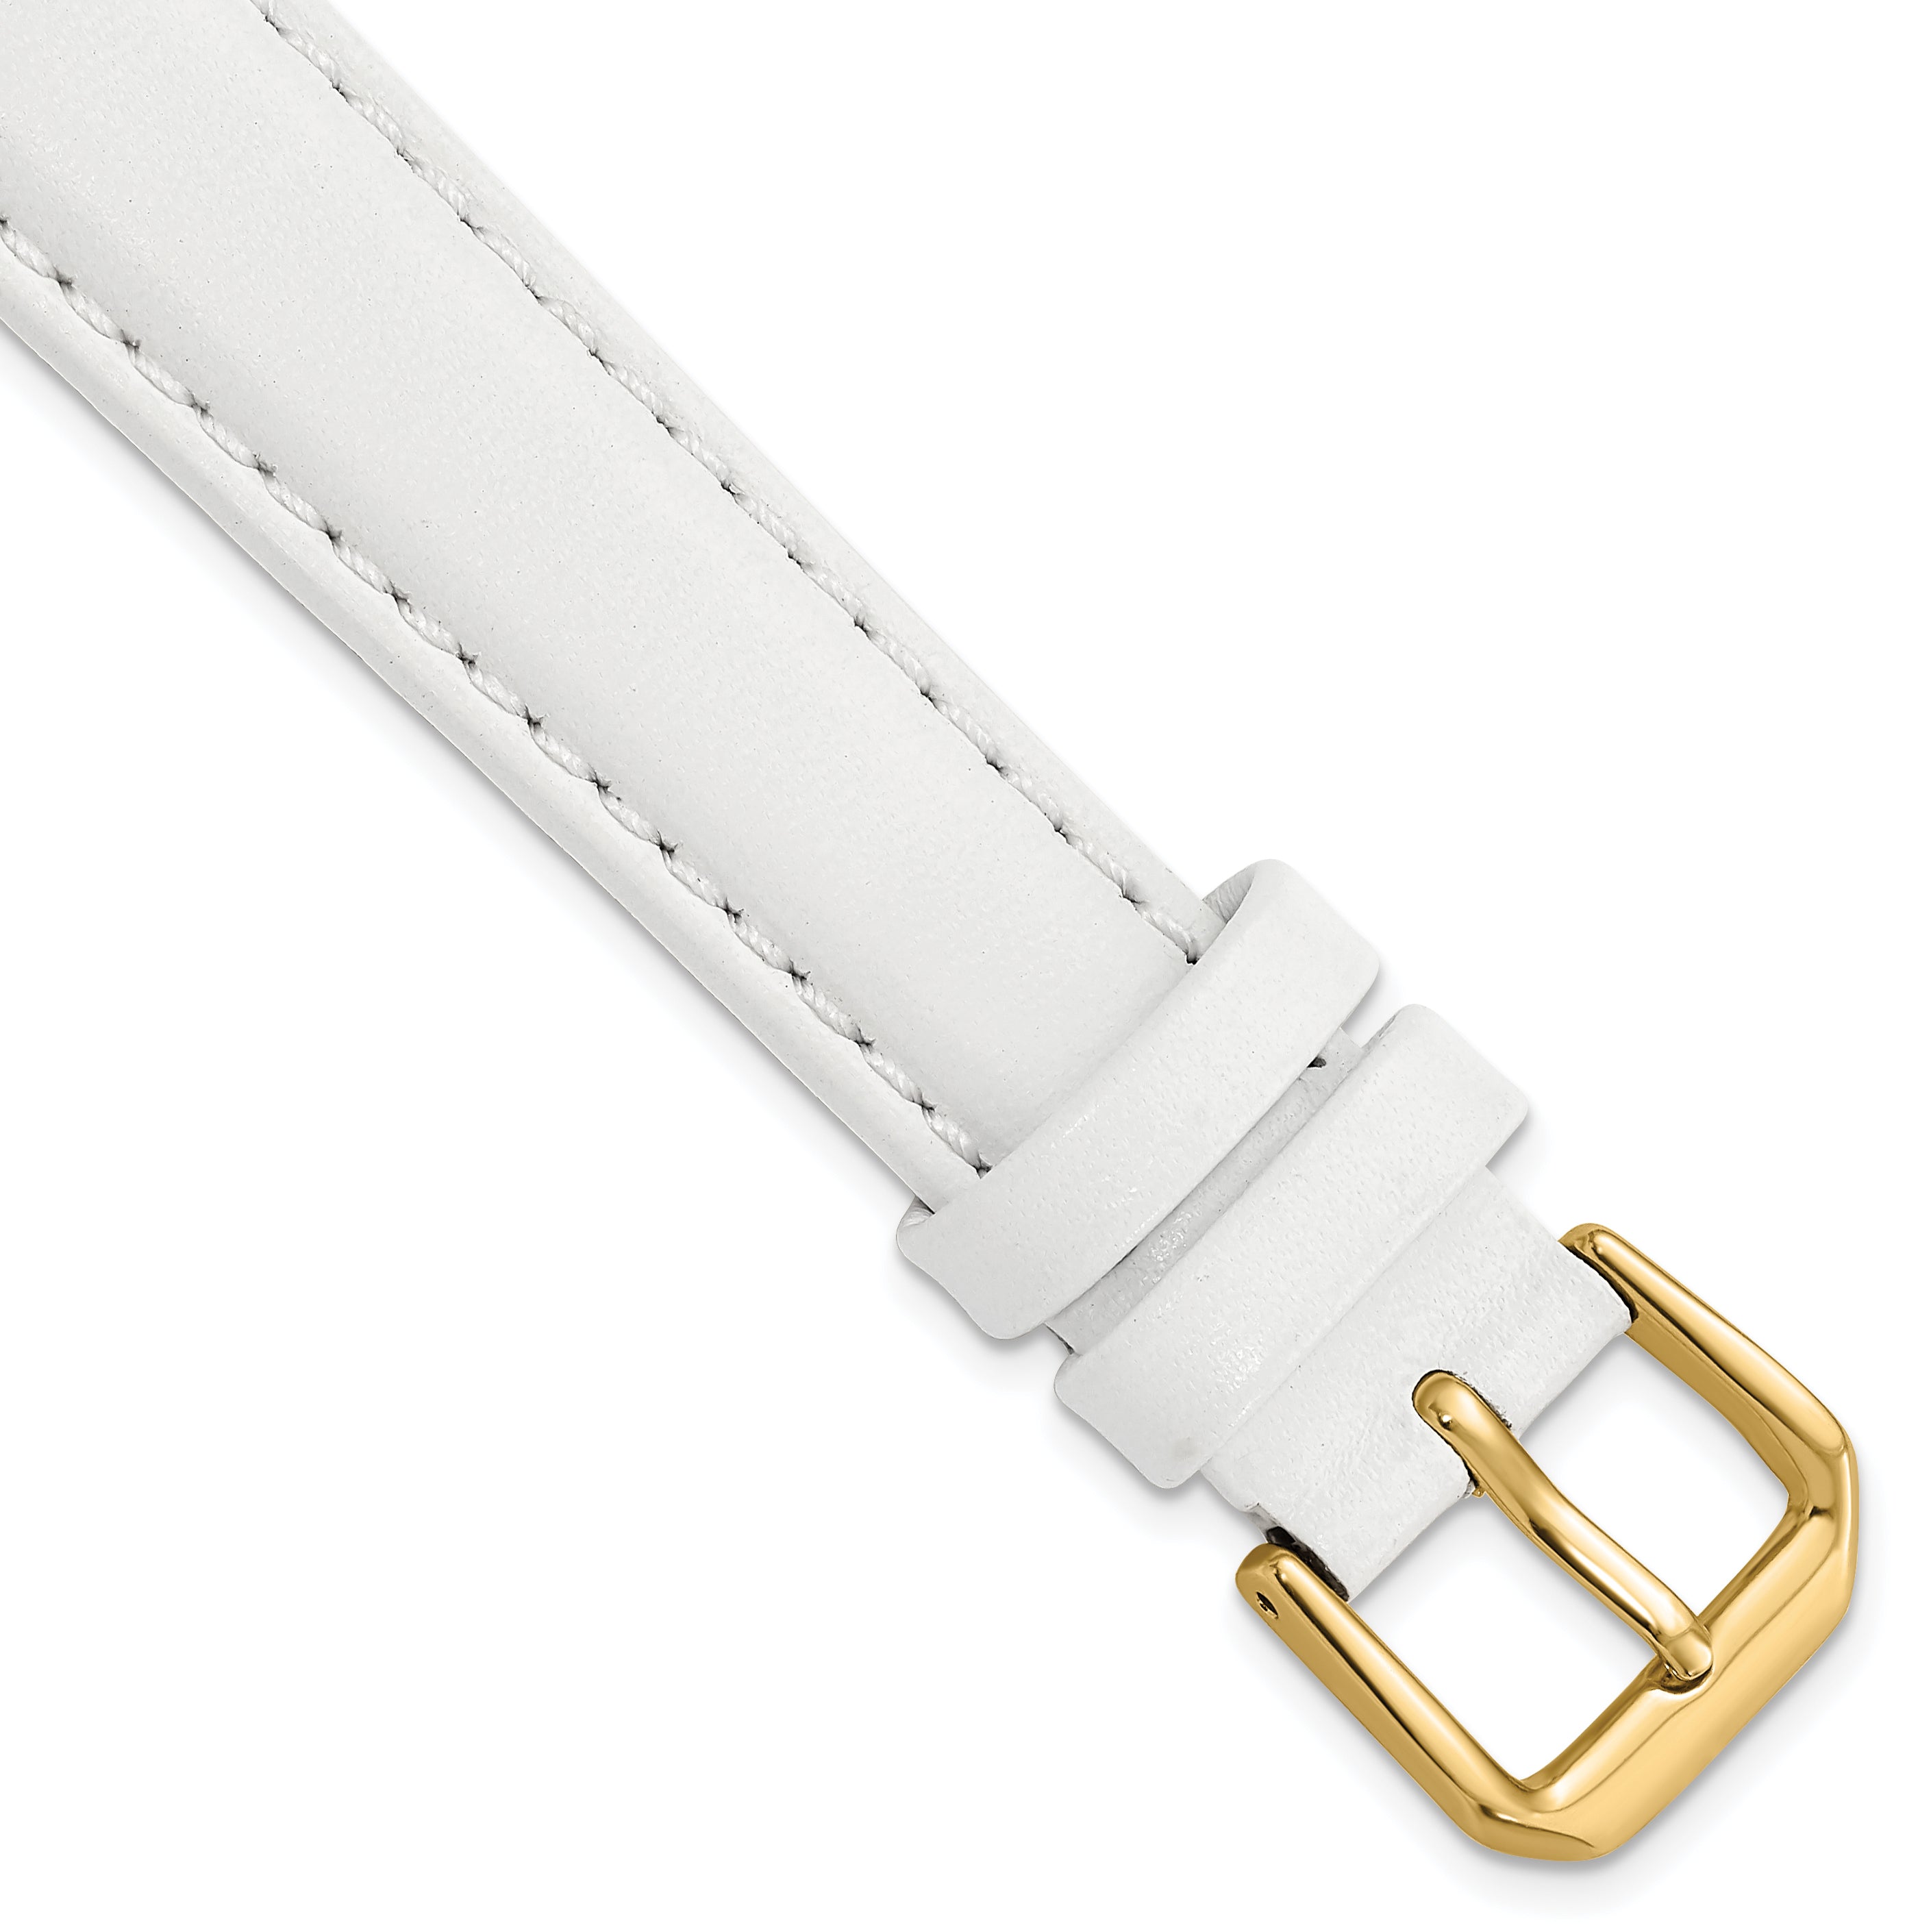 DeBeer 16mm White Smooth Leather with Gold-tone Buckle 7.5 inch Watch Band